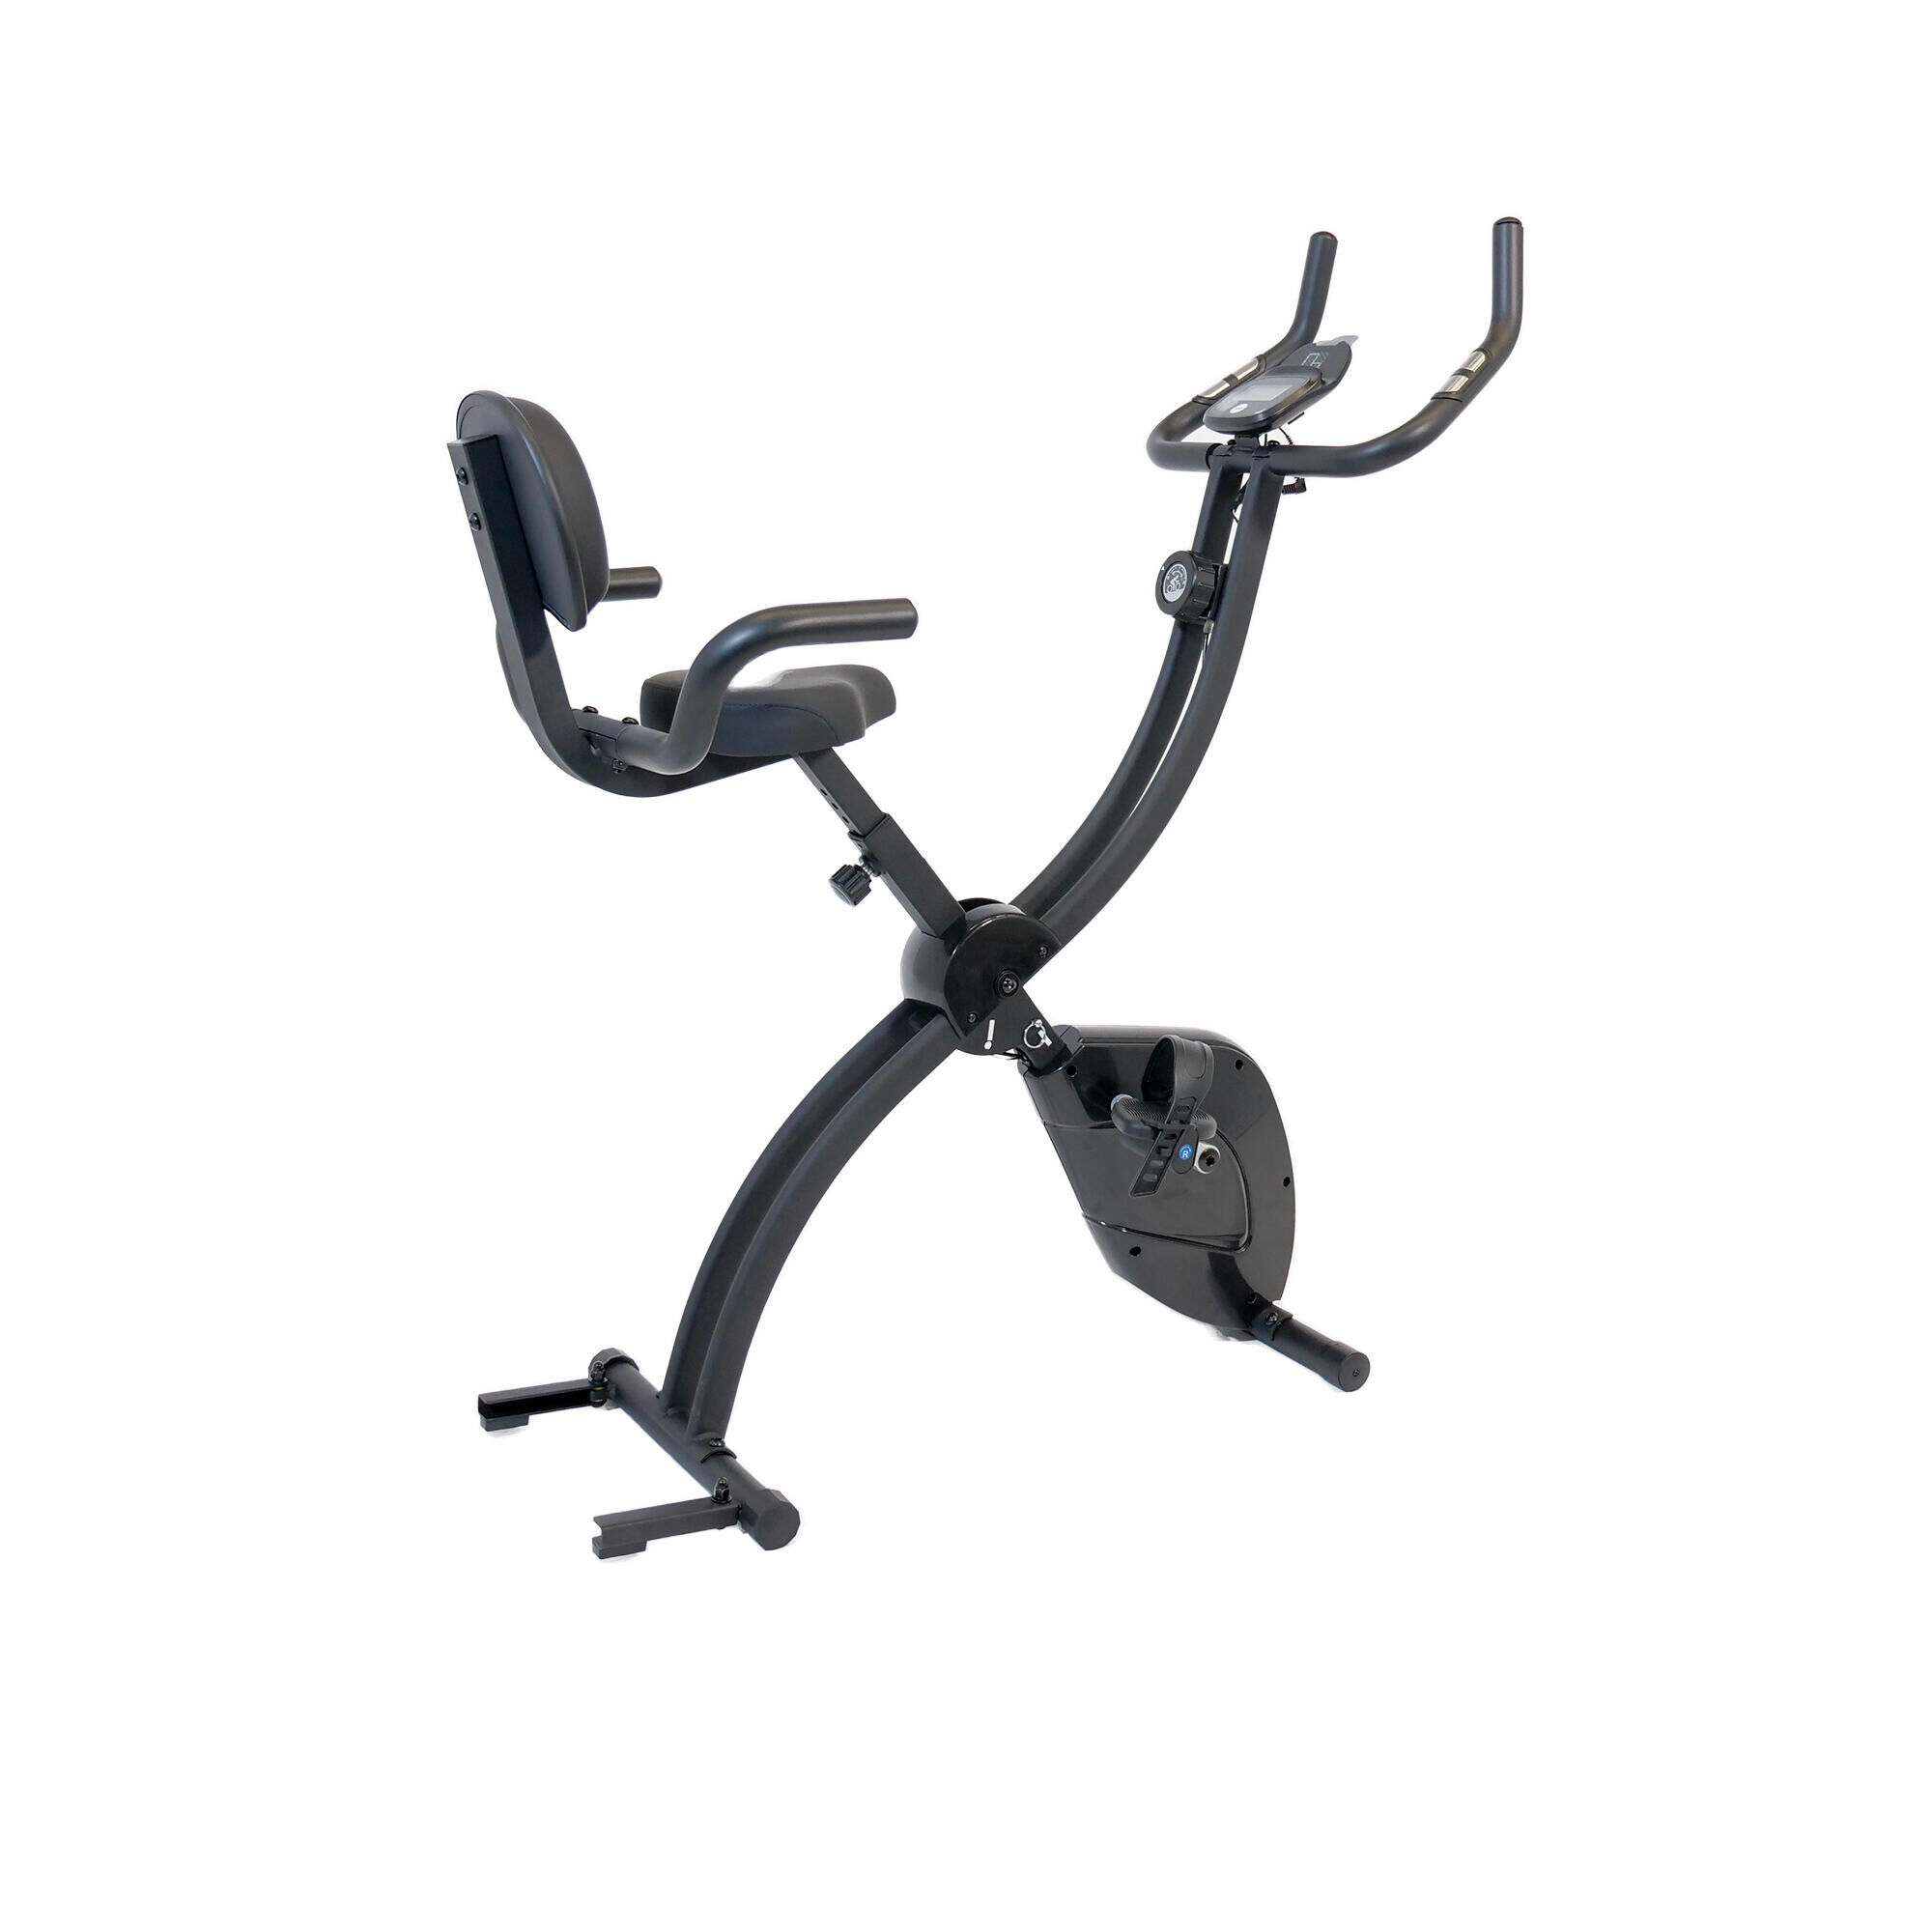 DOMYOS Exercise Bike X-Bike - Collapsible, Compact, and Very Quiet